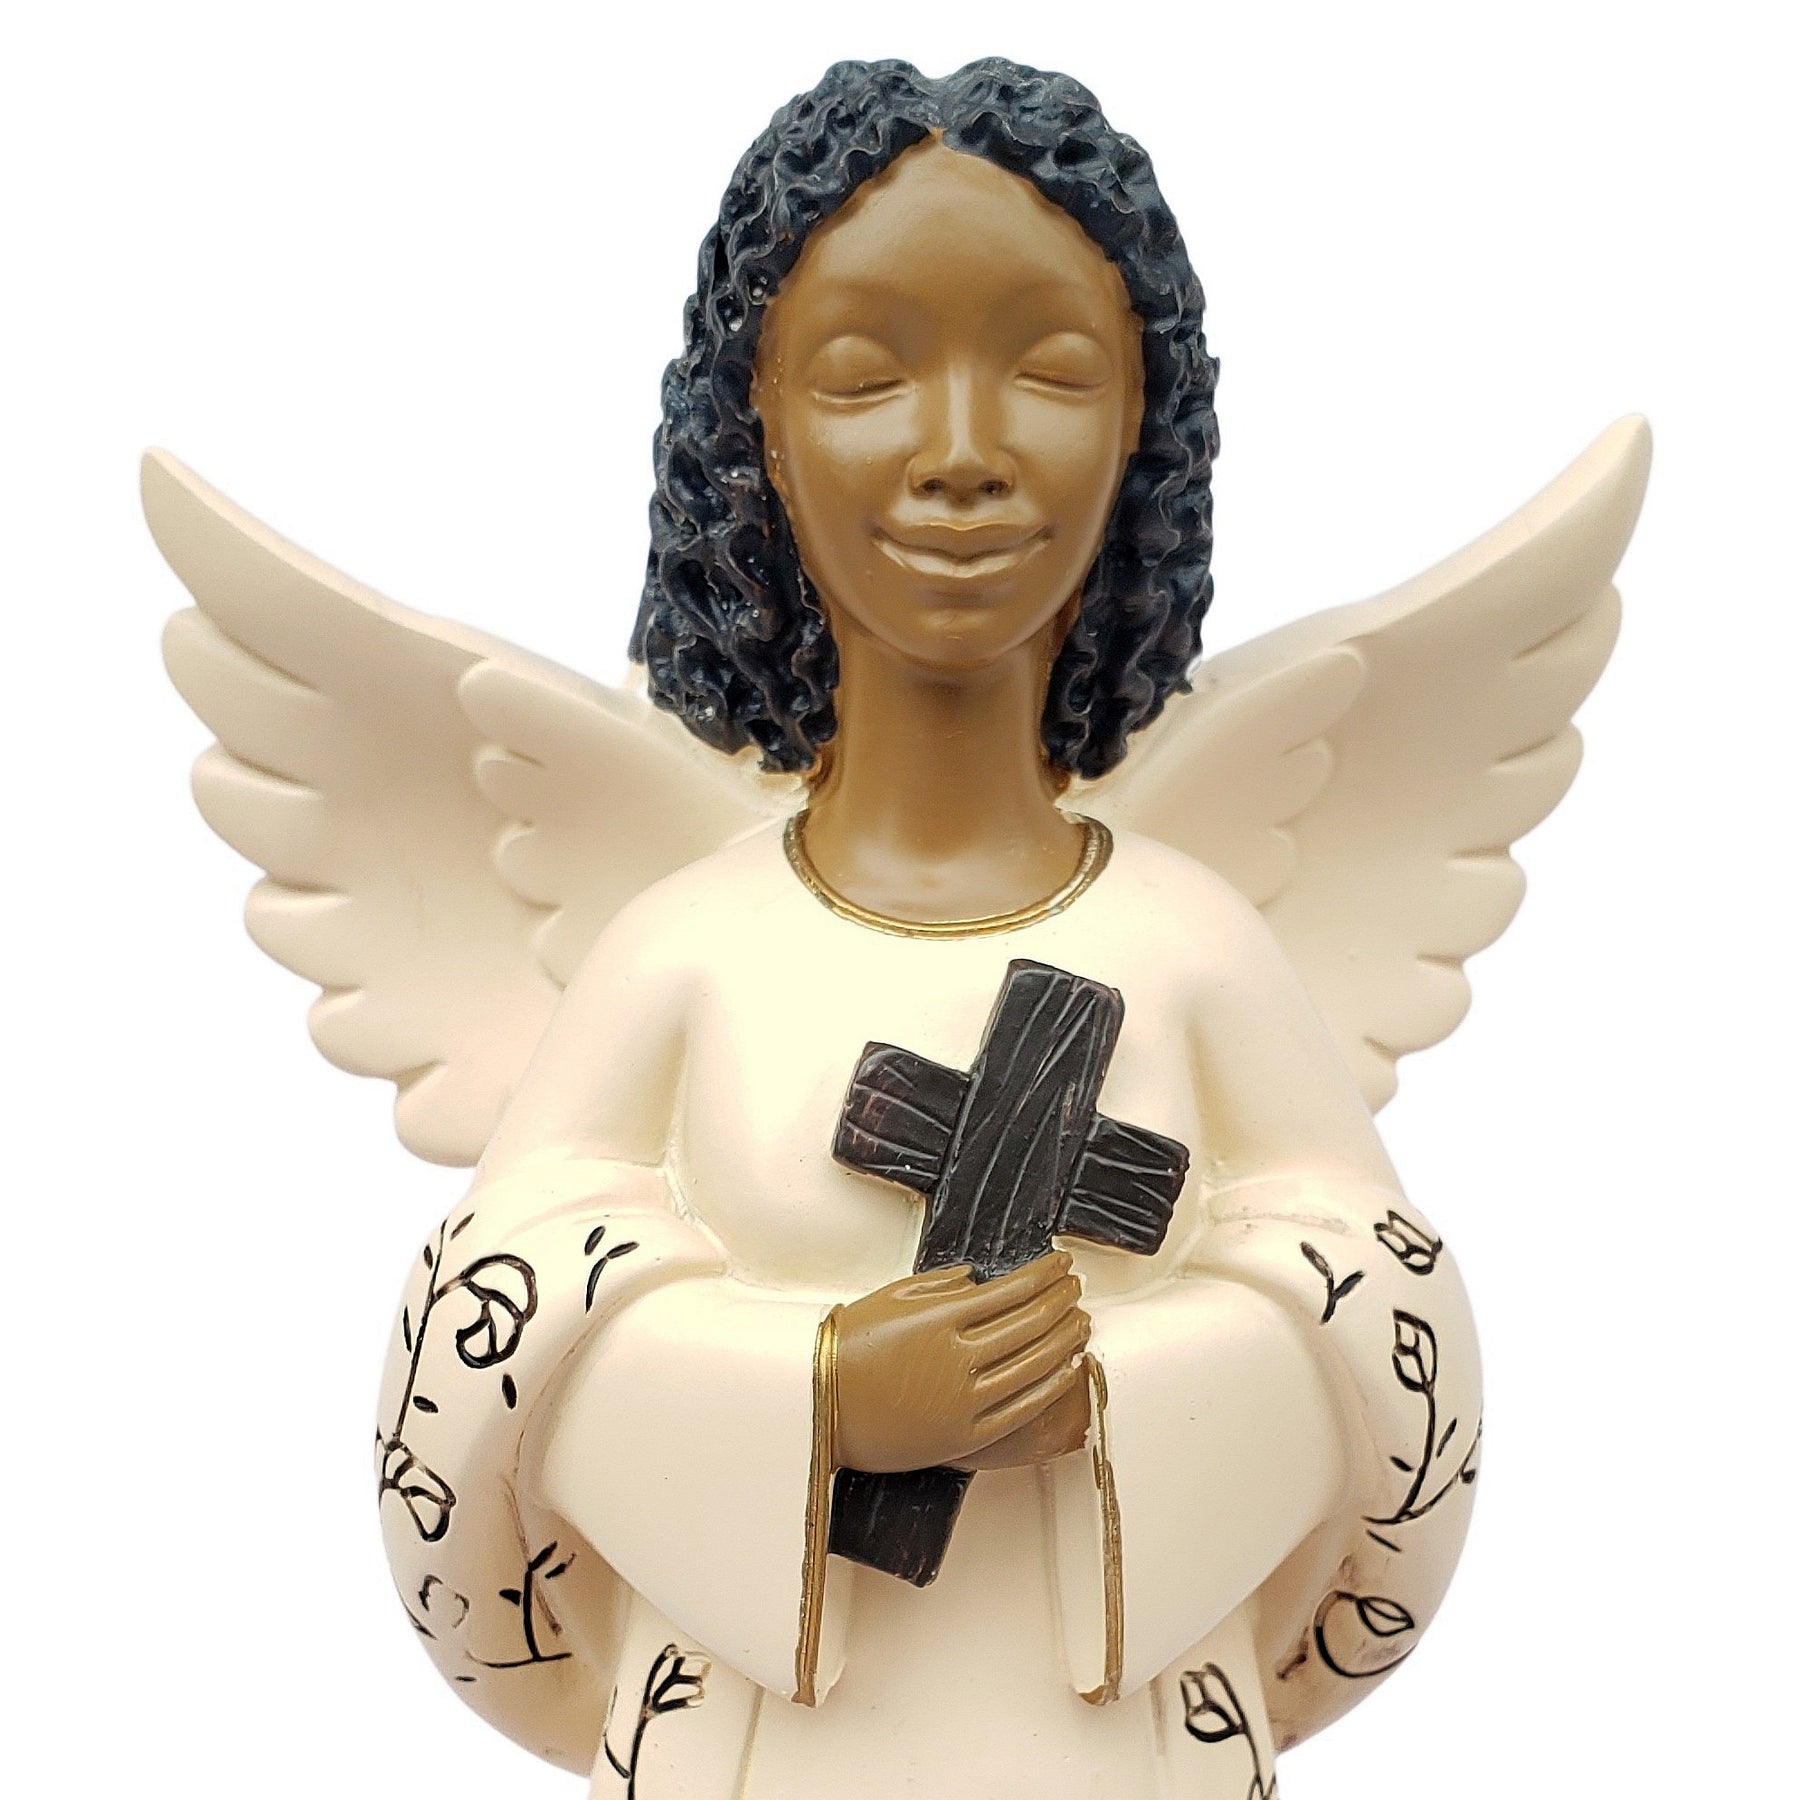 5 of 6: We Will Serve the Lord: African American Angelic Figurine